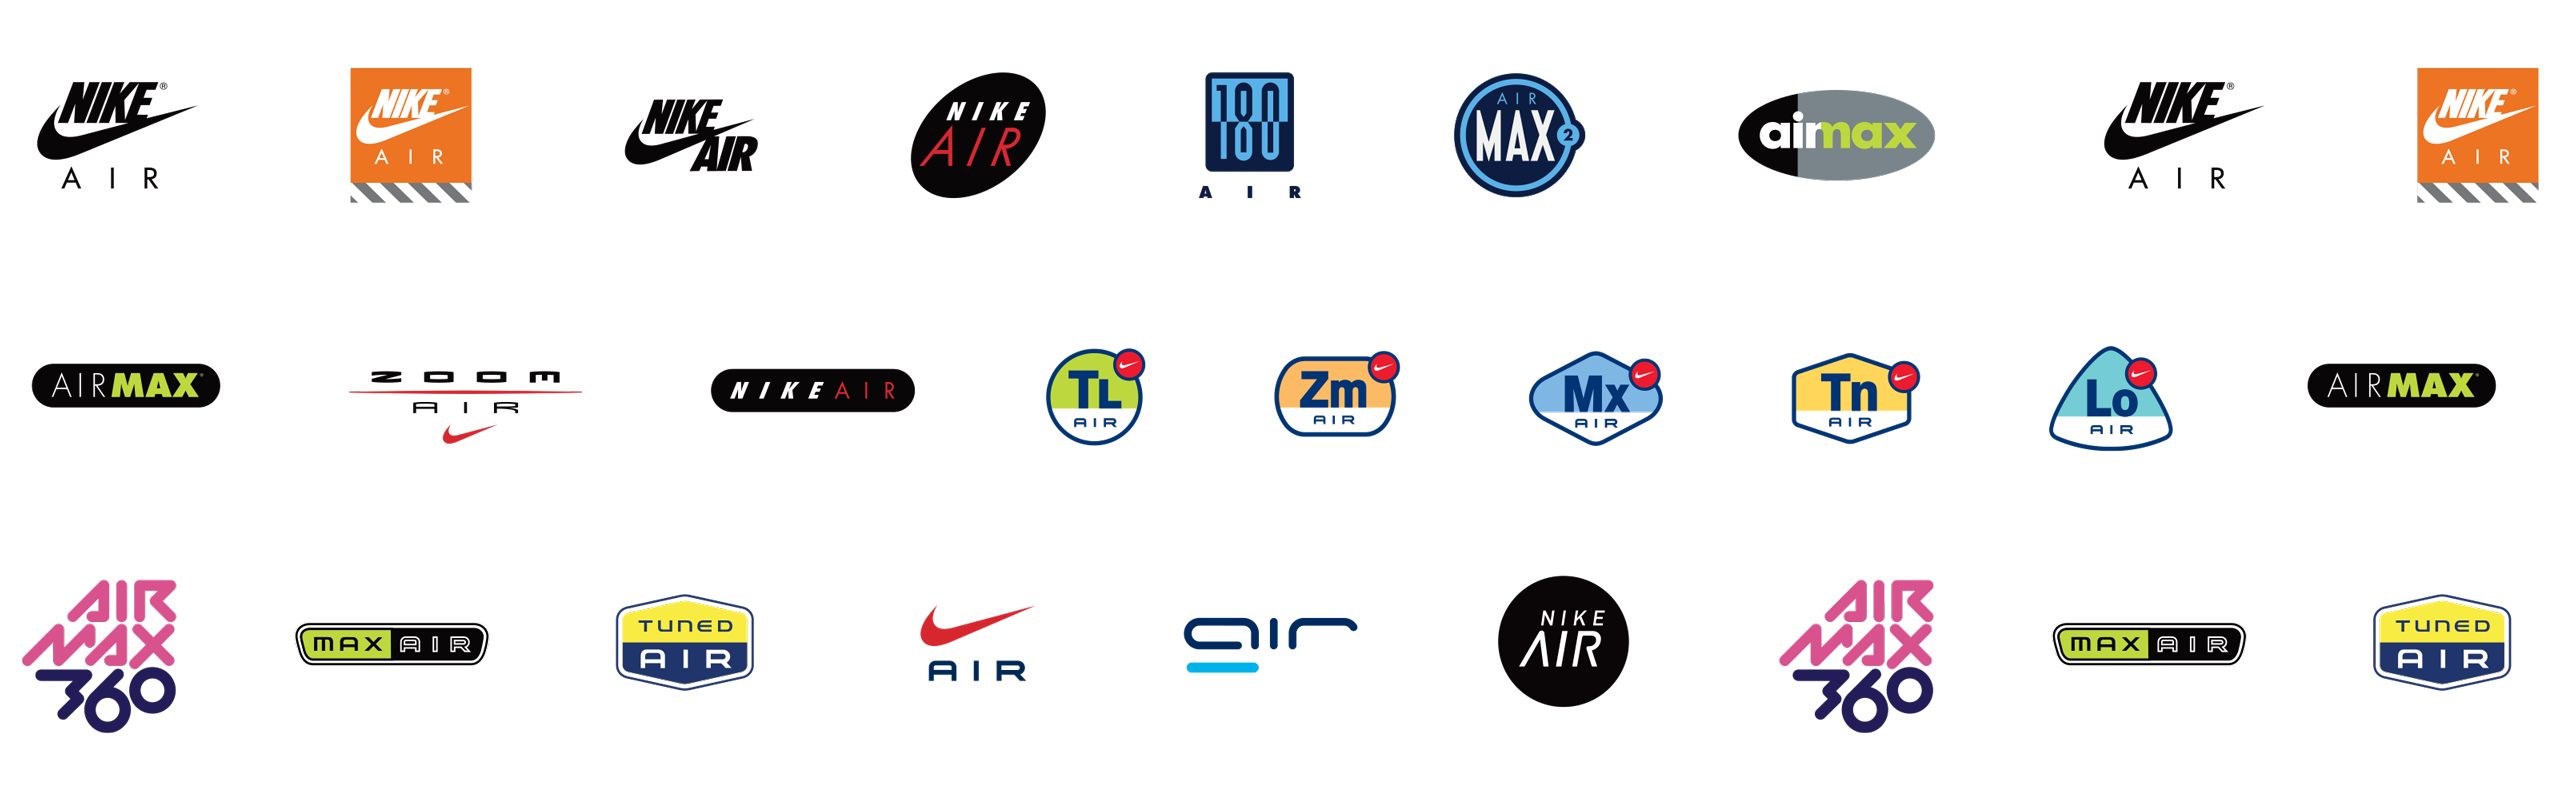 005  RvceShops - The Nike Air Max Genome Joins The Brands Logo